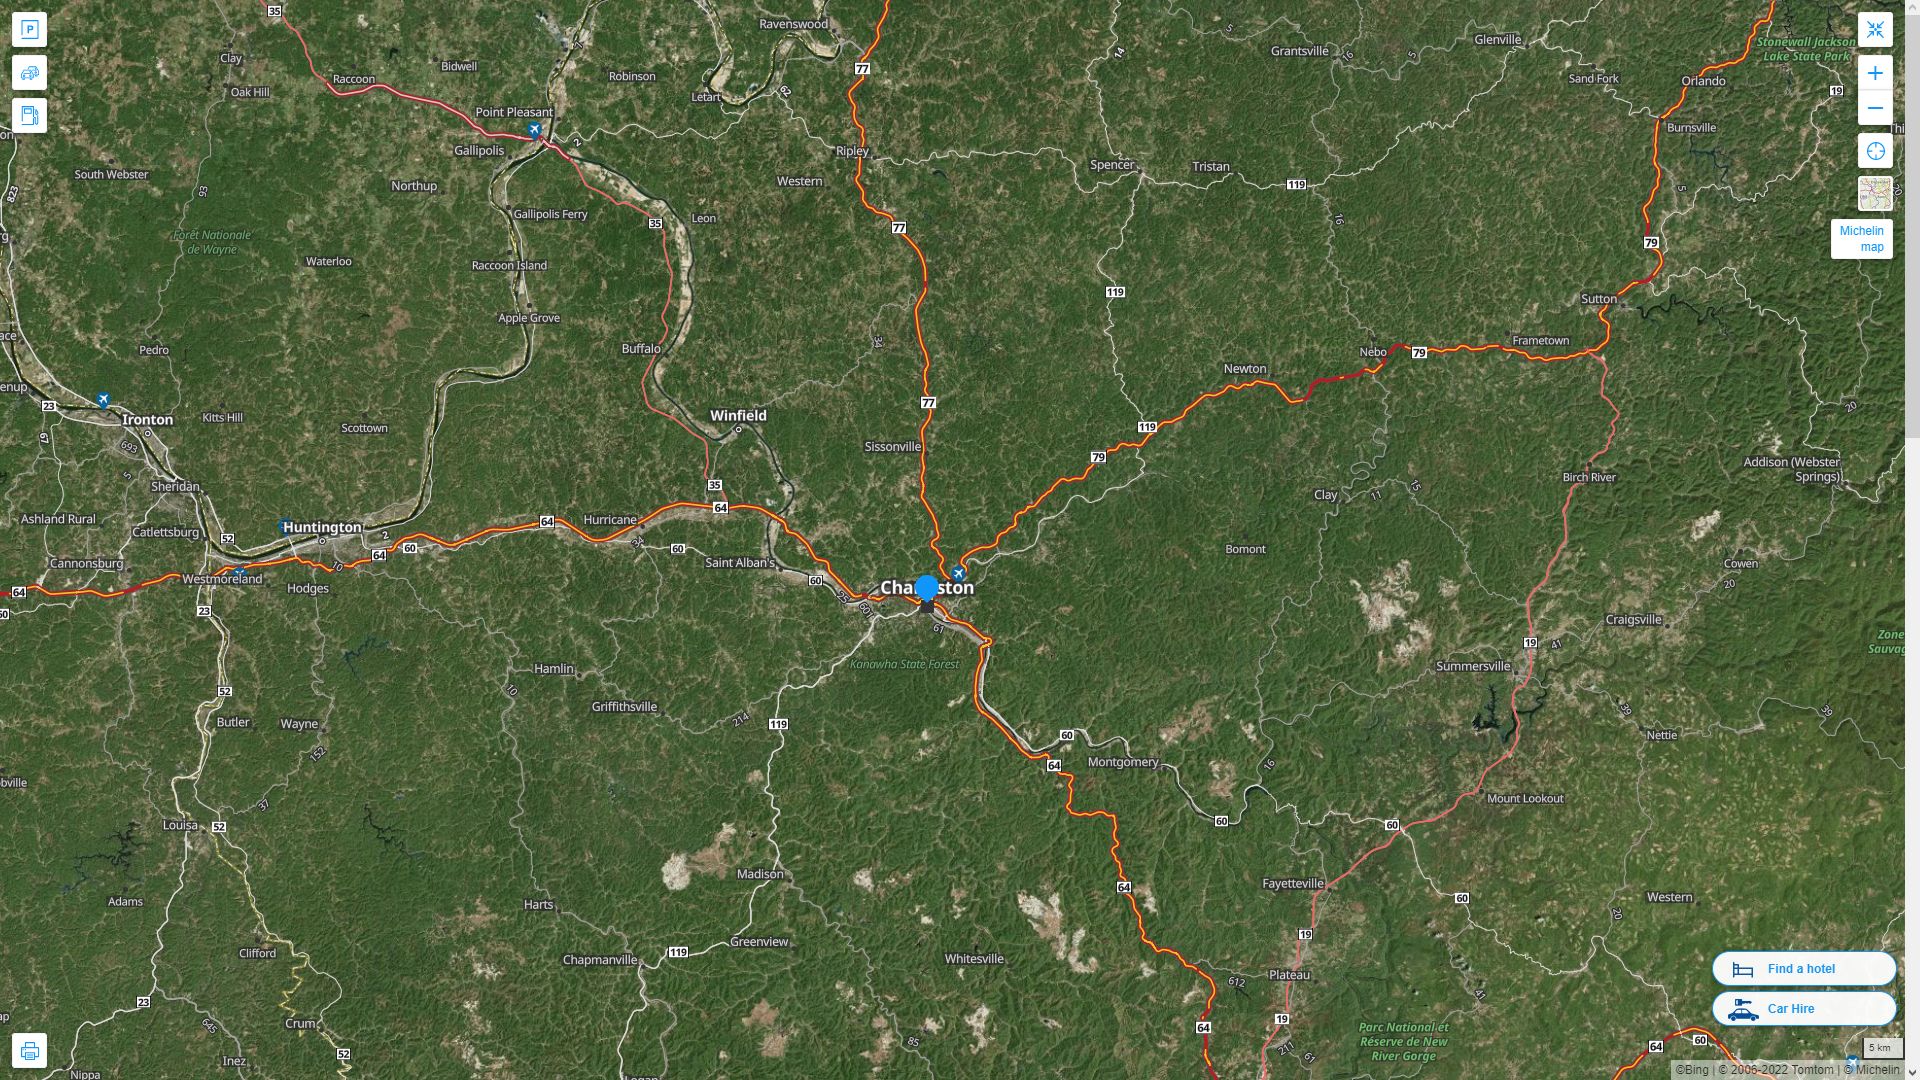 Charleston West Virginia Highway and Road Map with Satellite View